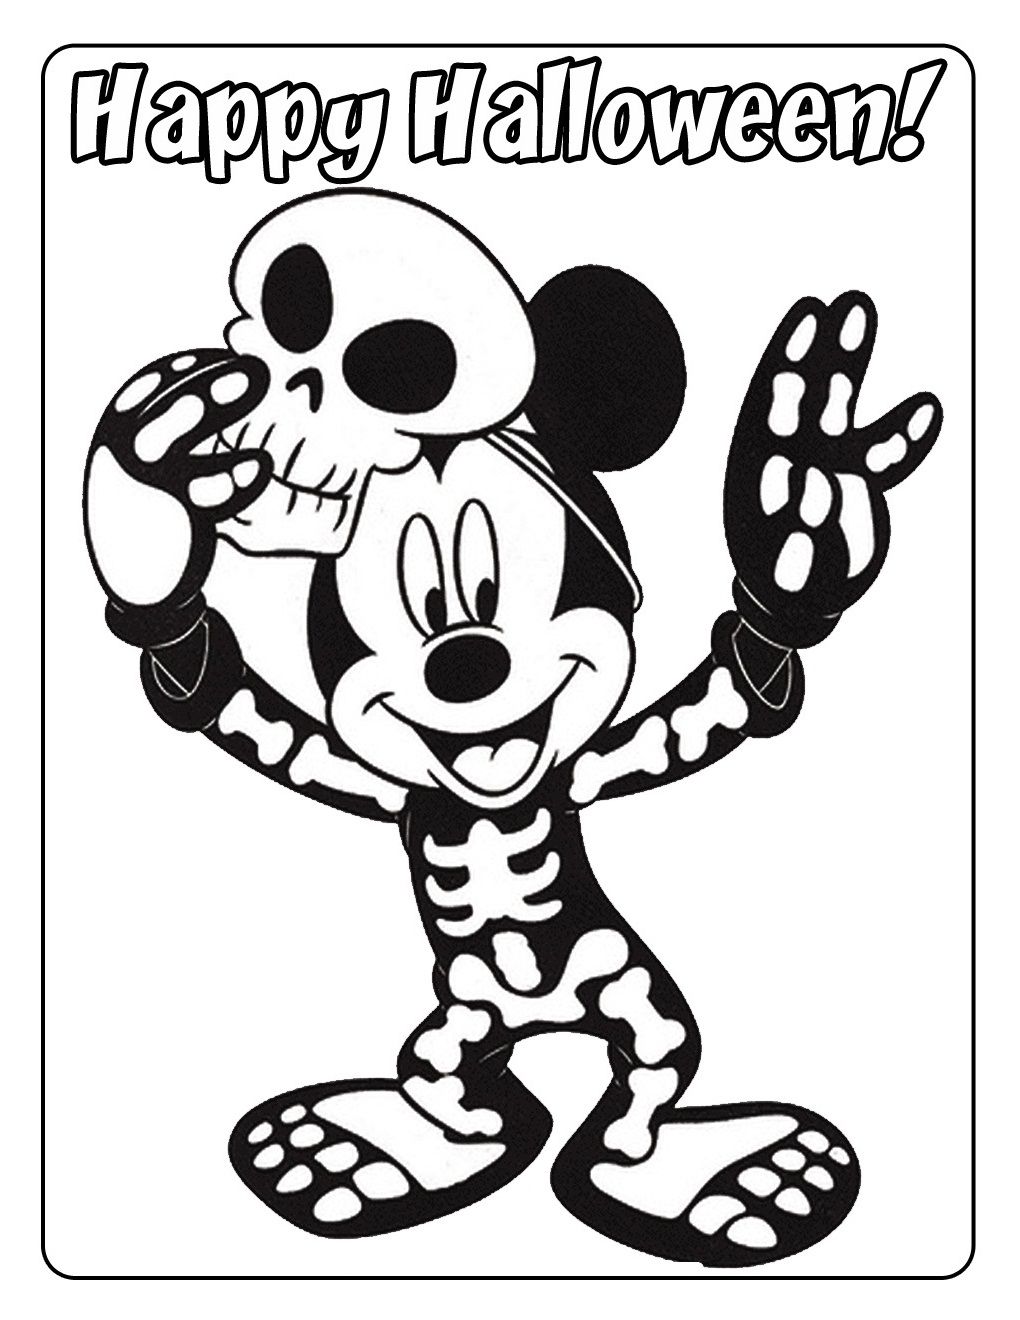 Free Halloween Cutouts Coloring Pages Download Free Halloween Cutouts 